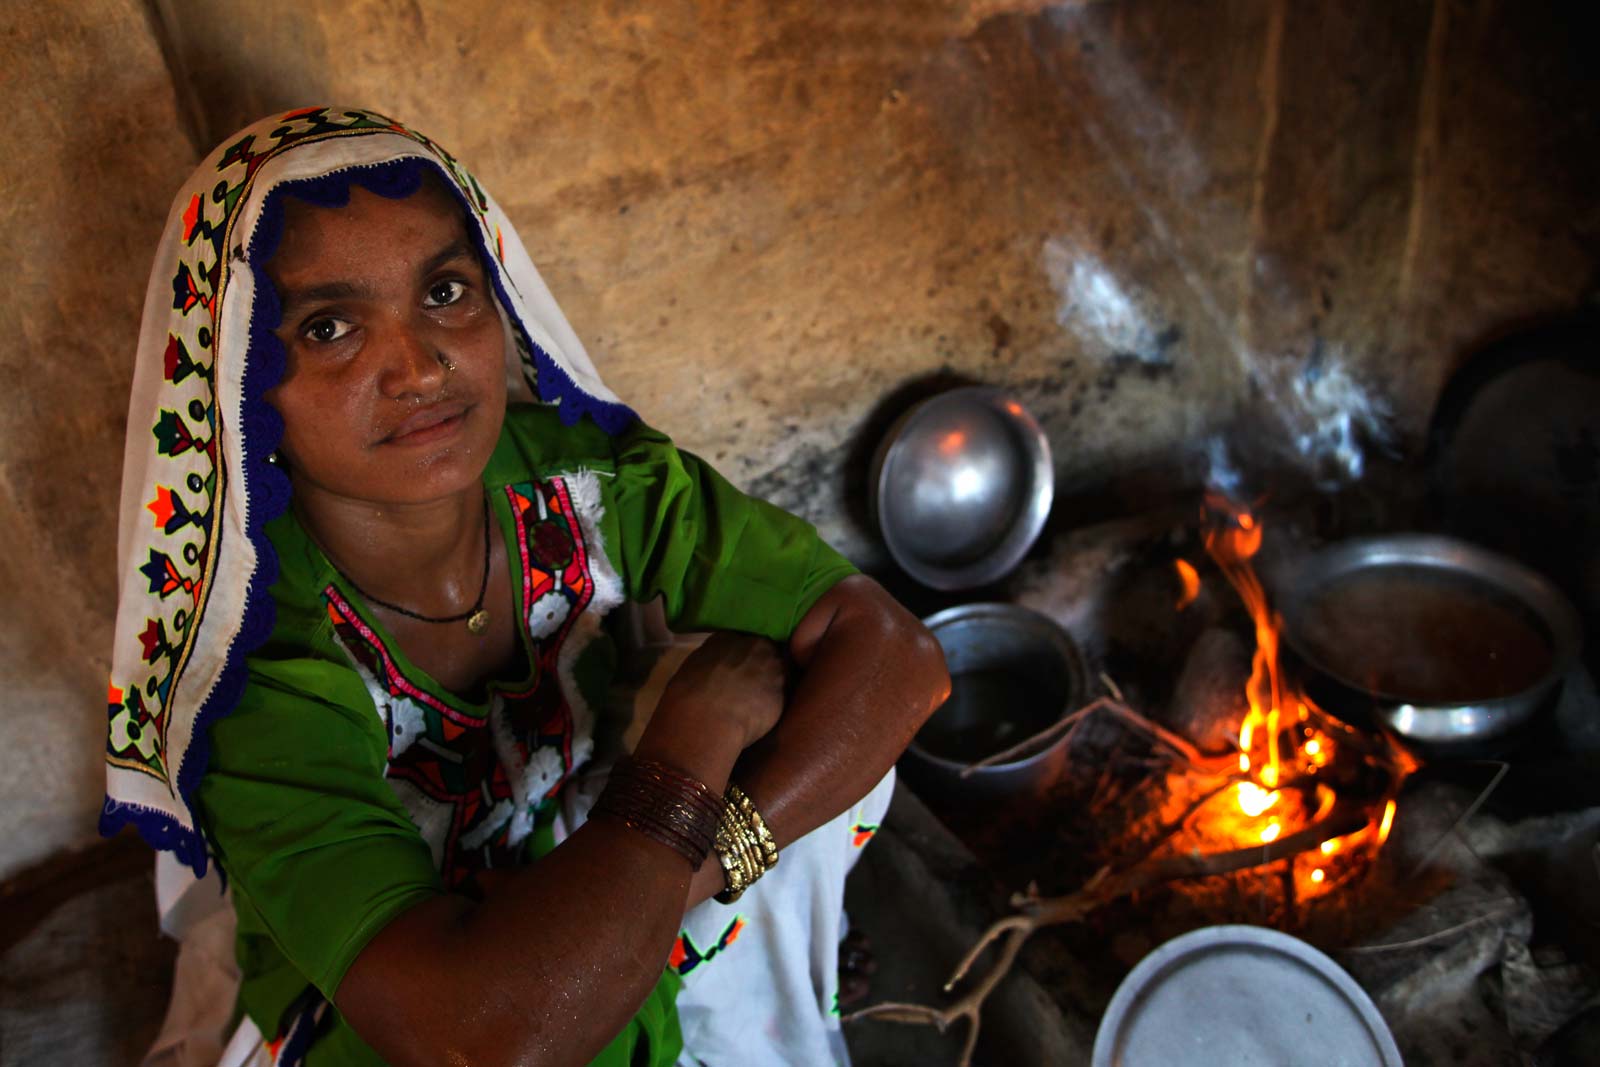 As dawn breaks Lady Health Worker Shankotila Bai prepares a breakfast of chapattis for her husband and three children. In a couple of hours, she will assume her duties attending to the basic health needs of the women and children among the 2,000 people in her village, Mithrio Bhatti, in the Thararkar district of Sindh Province.